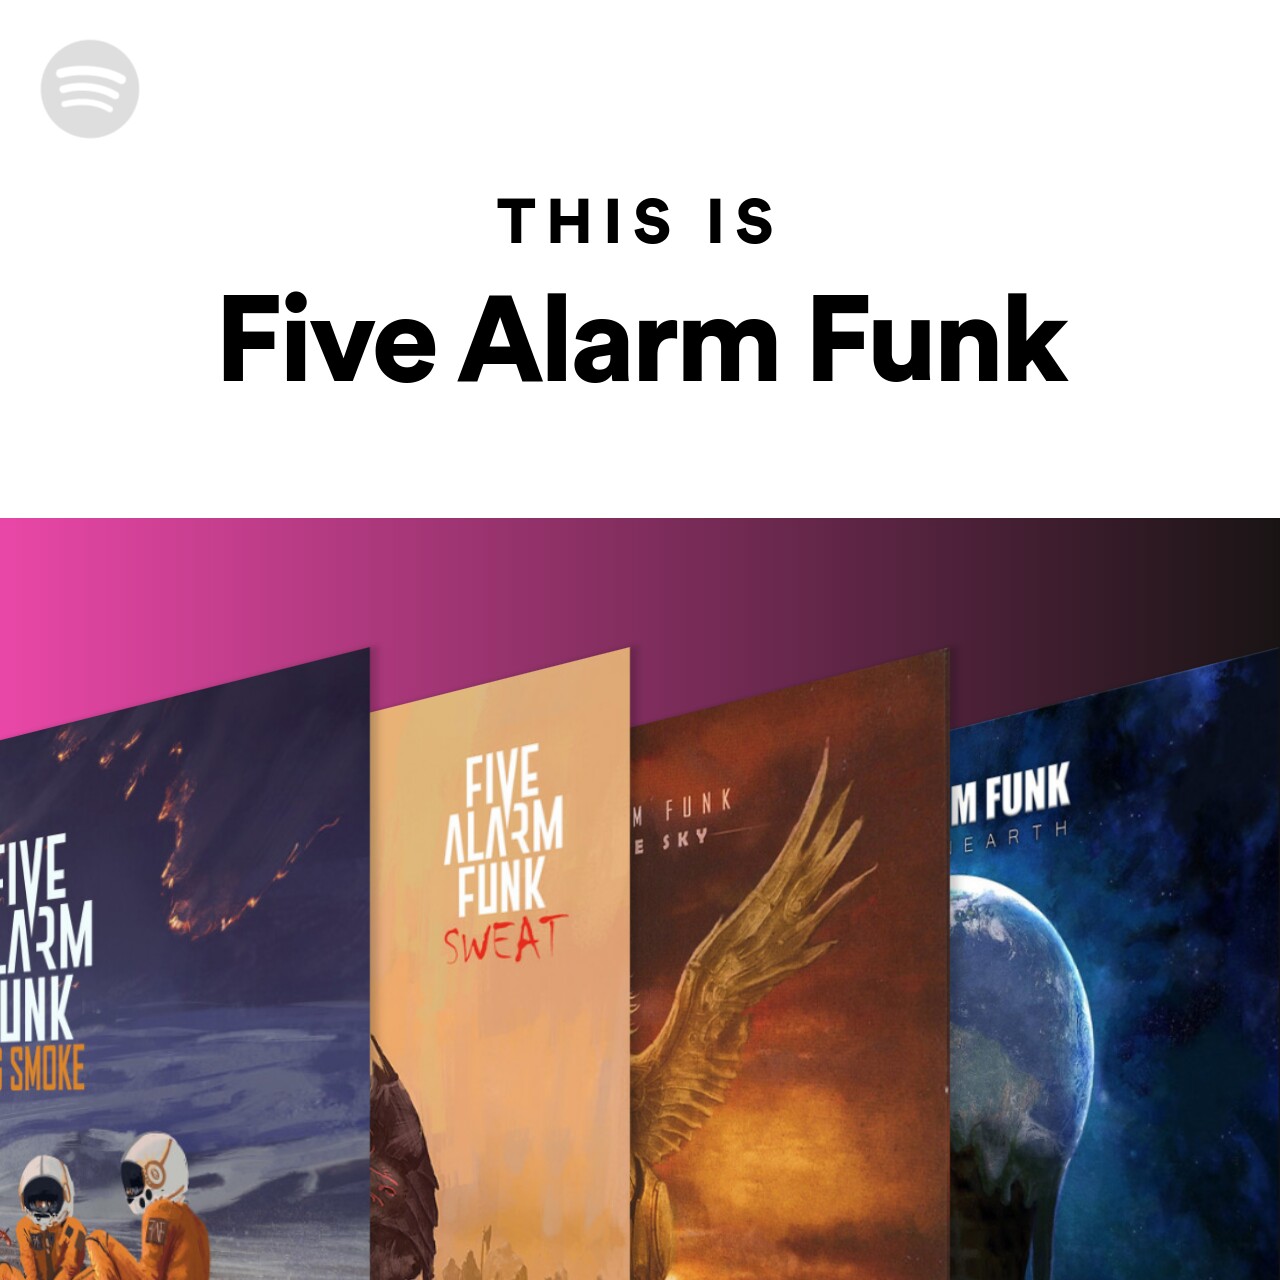 This Is Five Alarm Funk